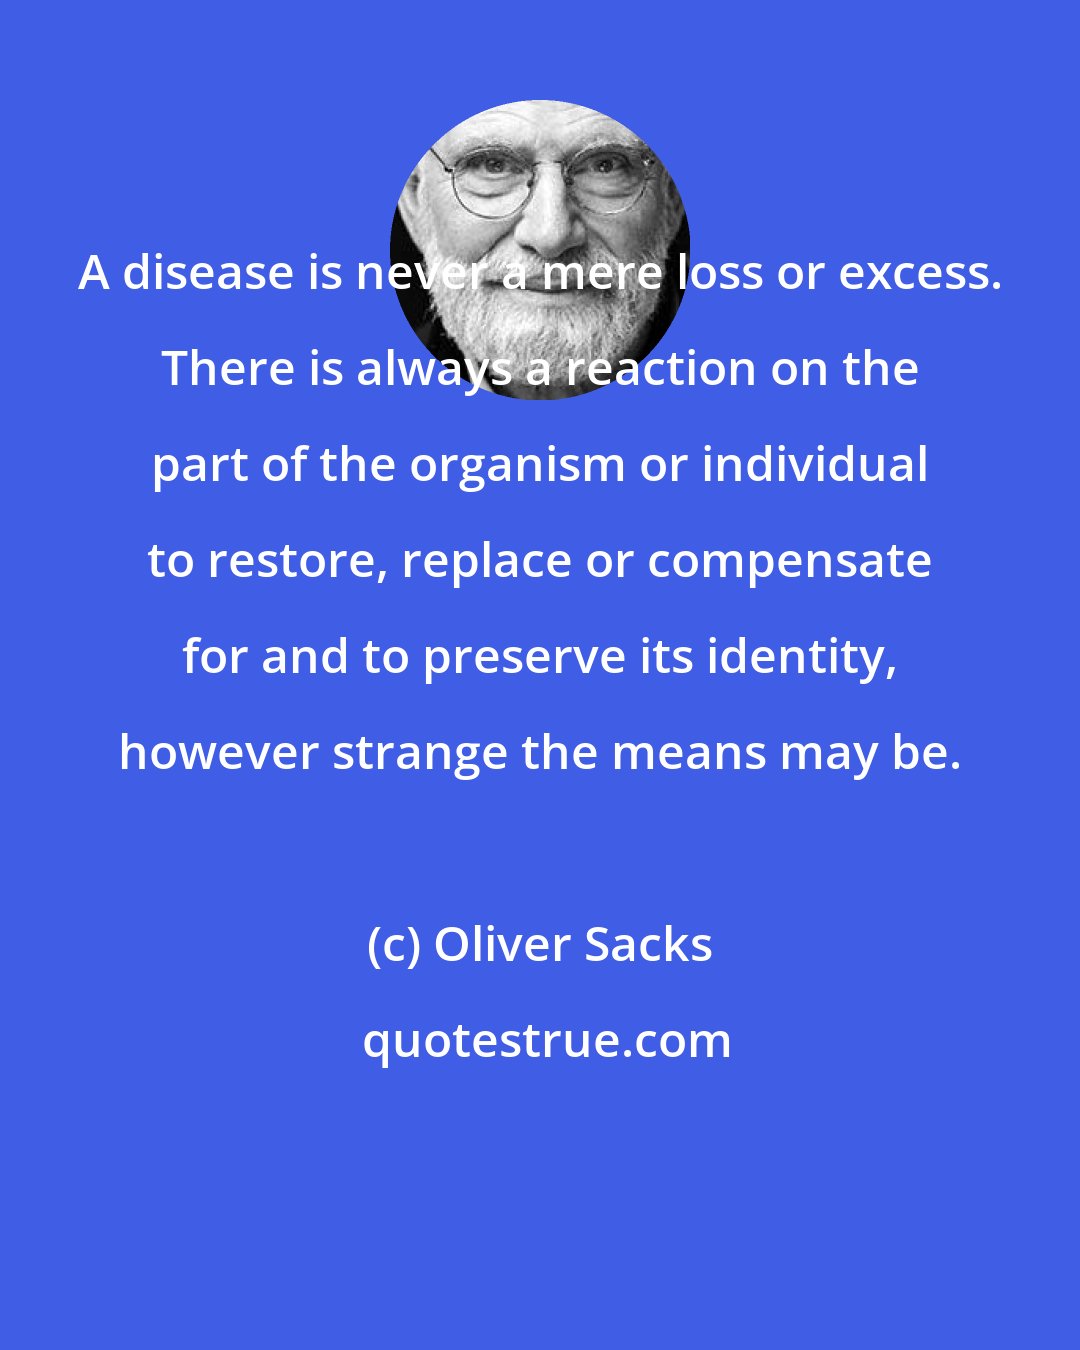 Oliver Sacks: A disease is never a mere loss or excess. There is always a reaction on the part of the organism or individual to restore, replace or compensate for and to preserve its identity, however strange the means may be.